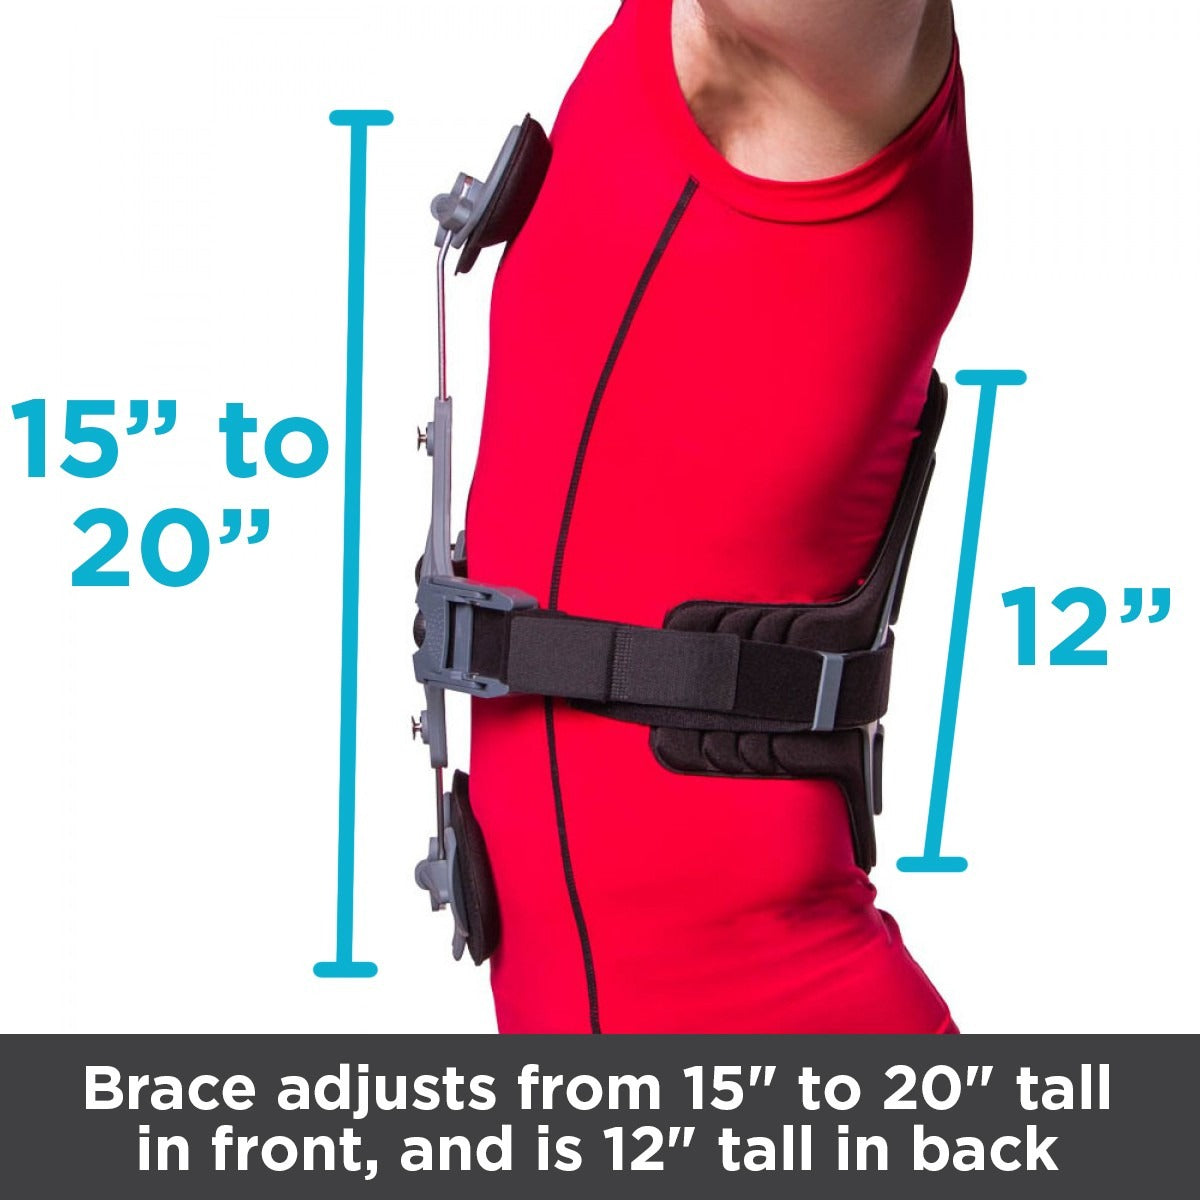 The brace adjusts from 15 inches to 20 inches tall in the front